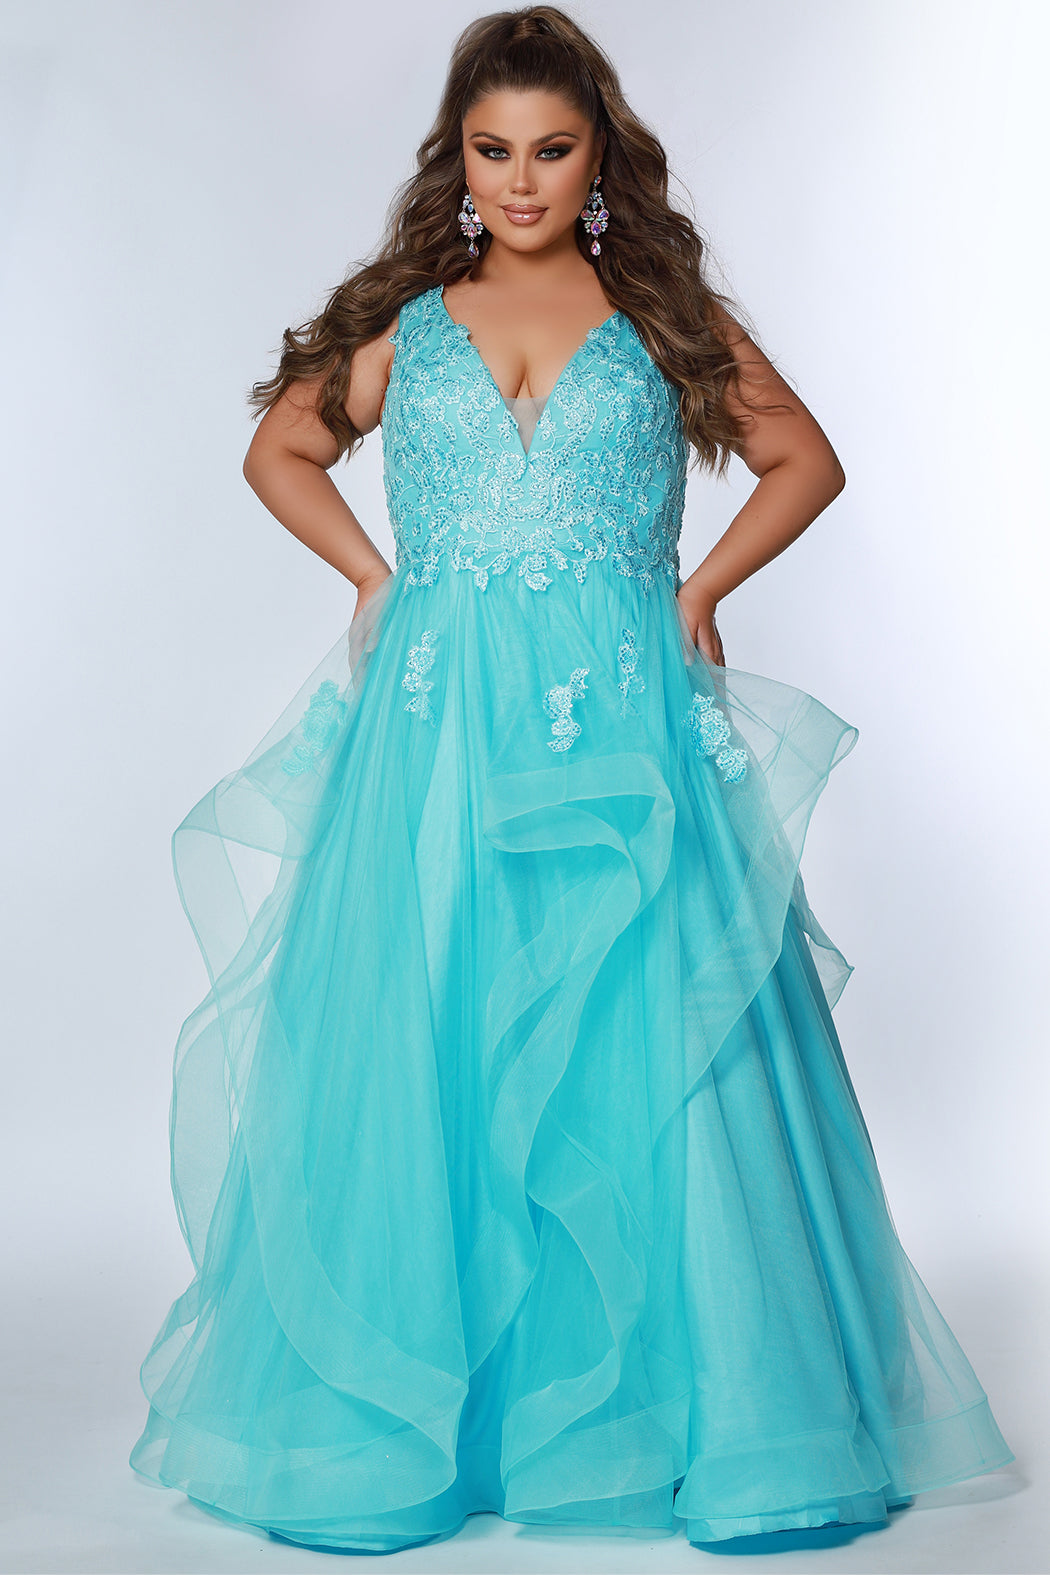 For a lasting impression at prom, the Sydney's Closet SC7347 Floral Lace Bodice dress offers timeless elegance with its layered tulle ballgown skirt and tonal mesh insert. The V-neckline and bra-friendly straps deliver a flattering fit, while the natural waistline and horsehair hem ensure a stylish finish.